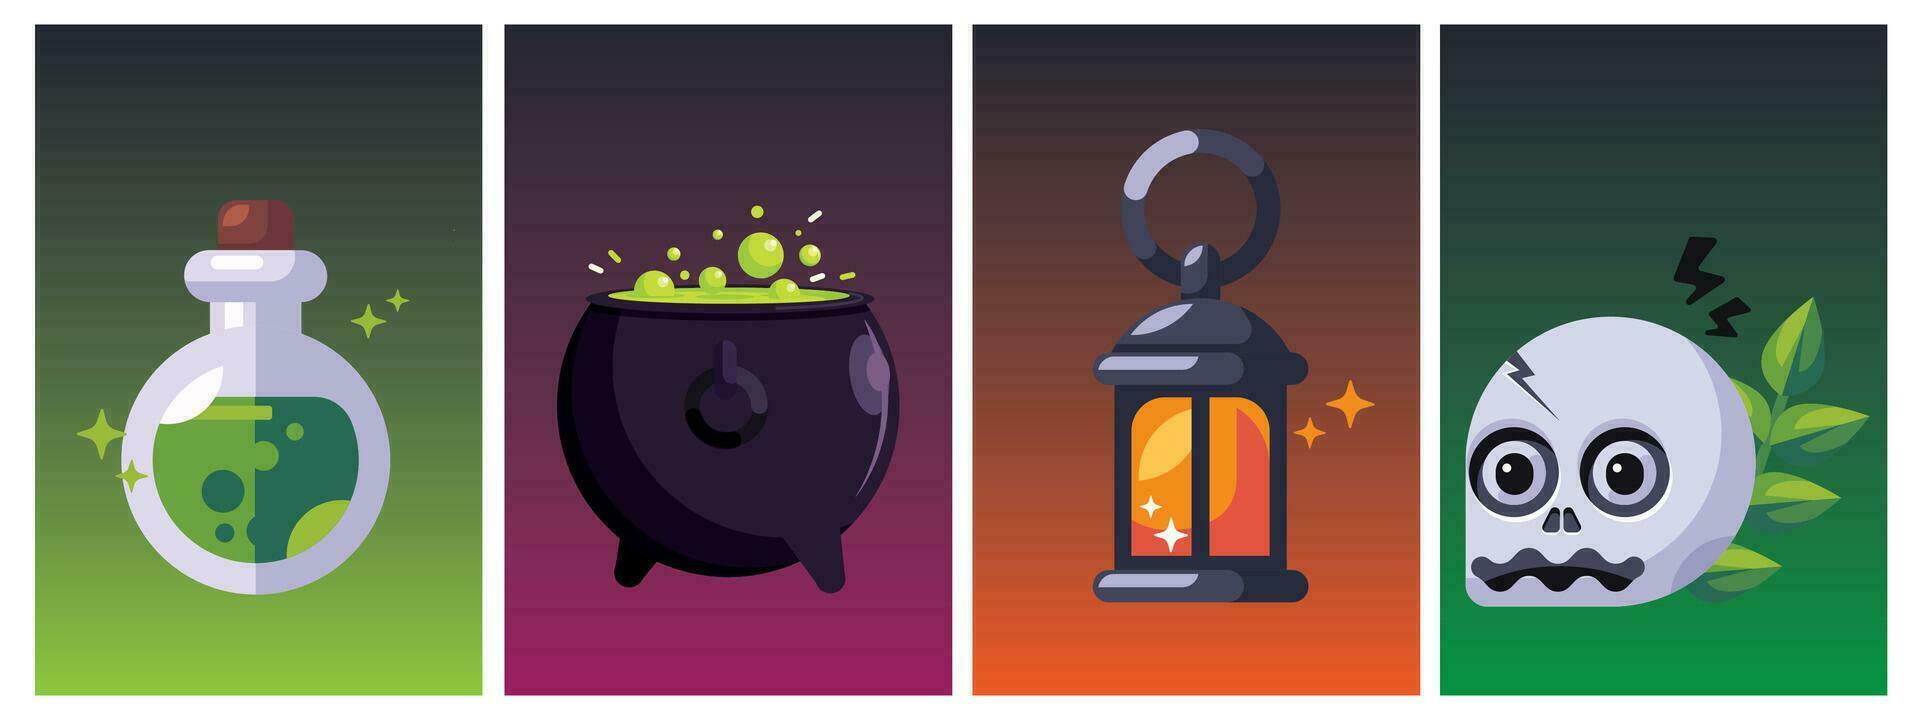 Set of alchemy game icons skull, lantern, witch cauldron, potion. Collection of magical objects. halloween icon vector